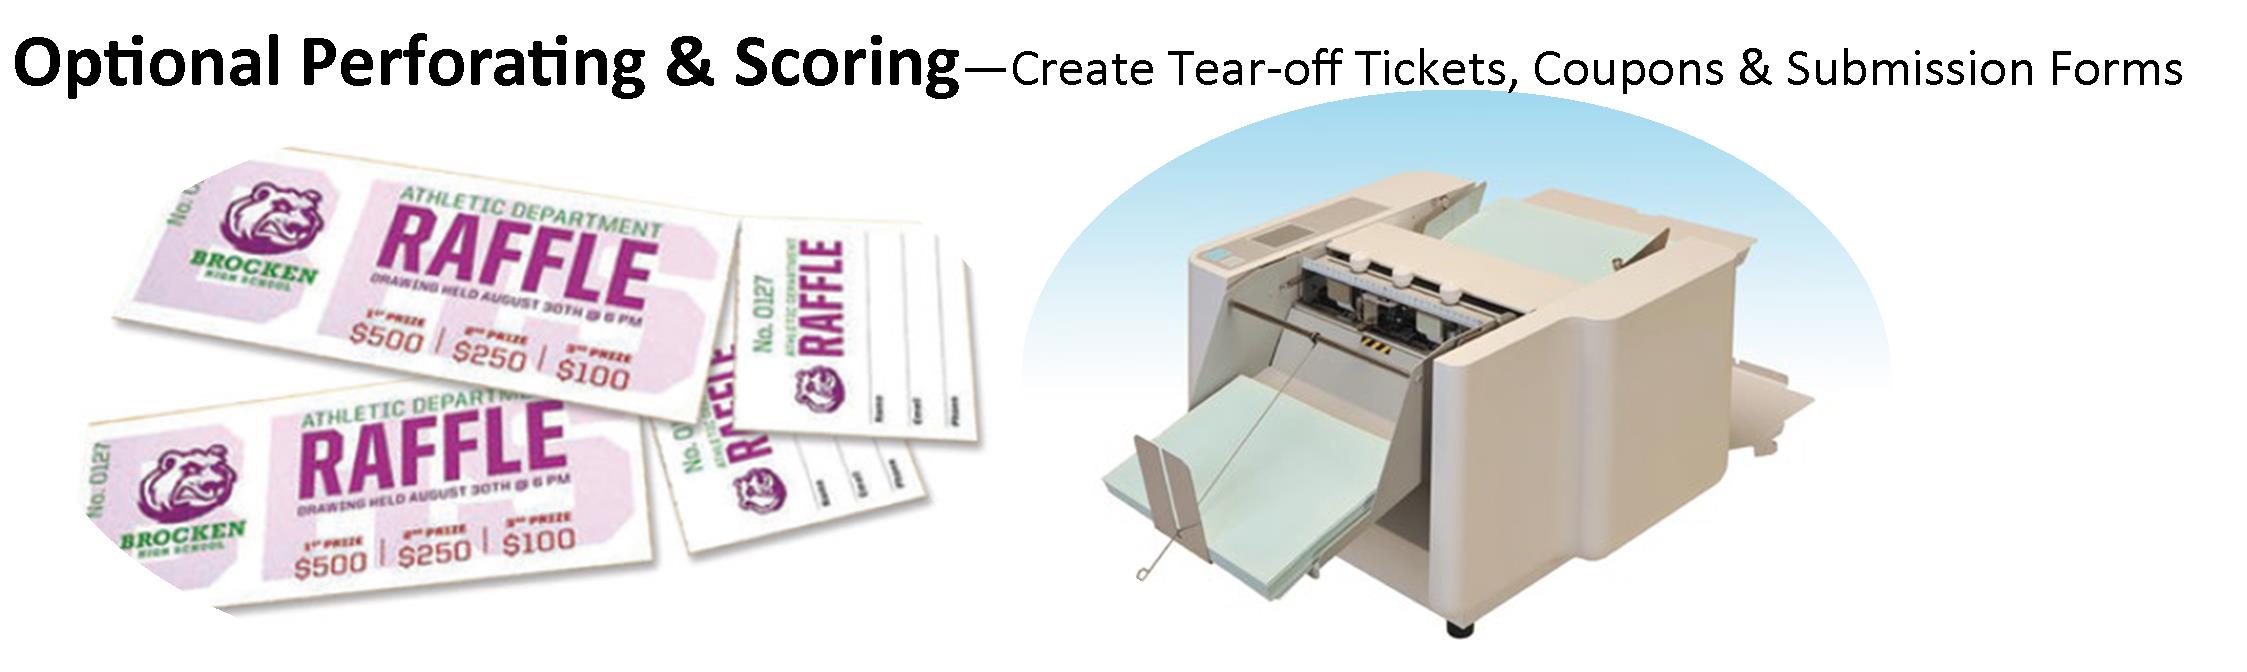 Optional Perforating, Scoring and Slitting Available for EZF-600 and EZF-500